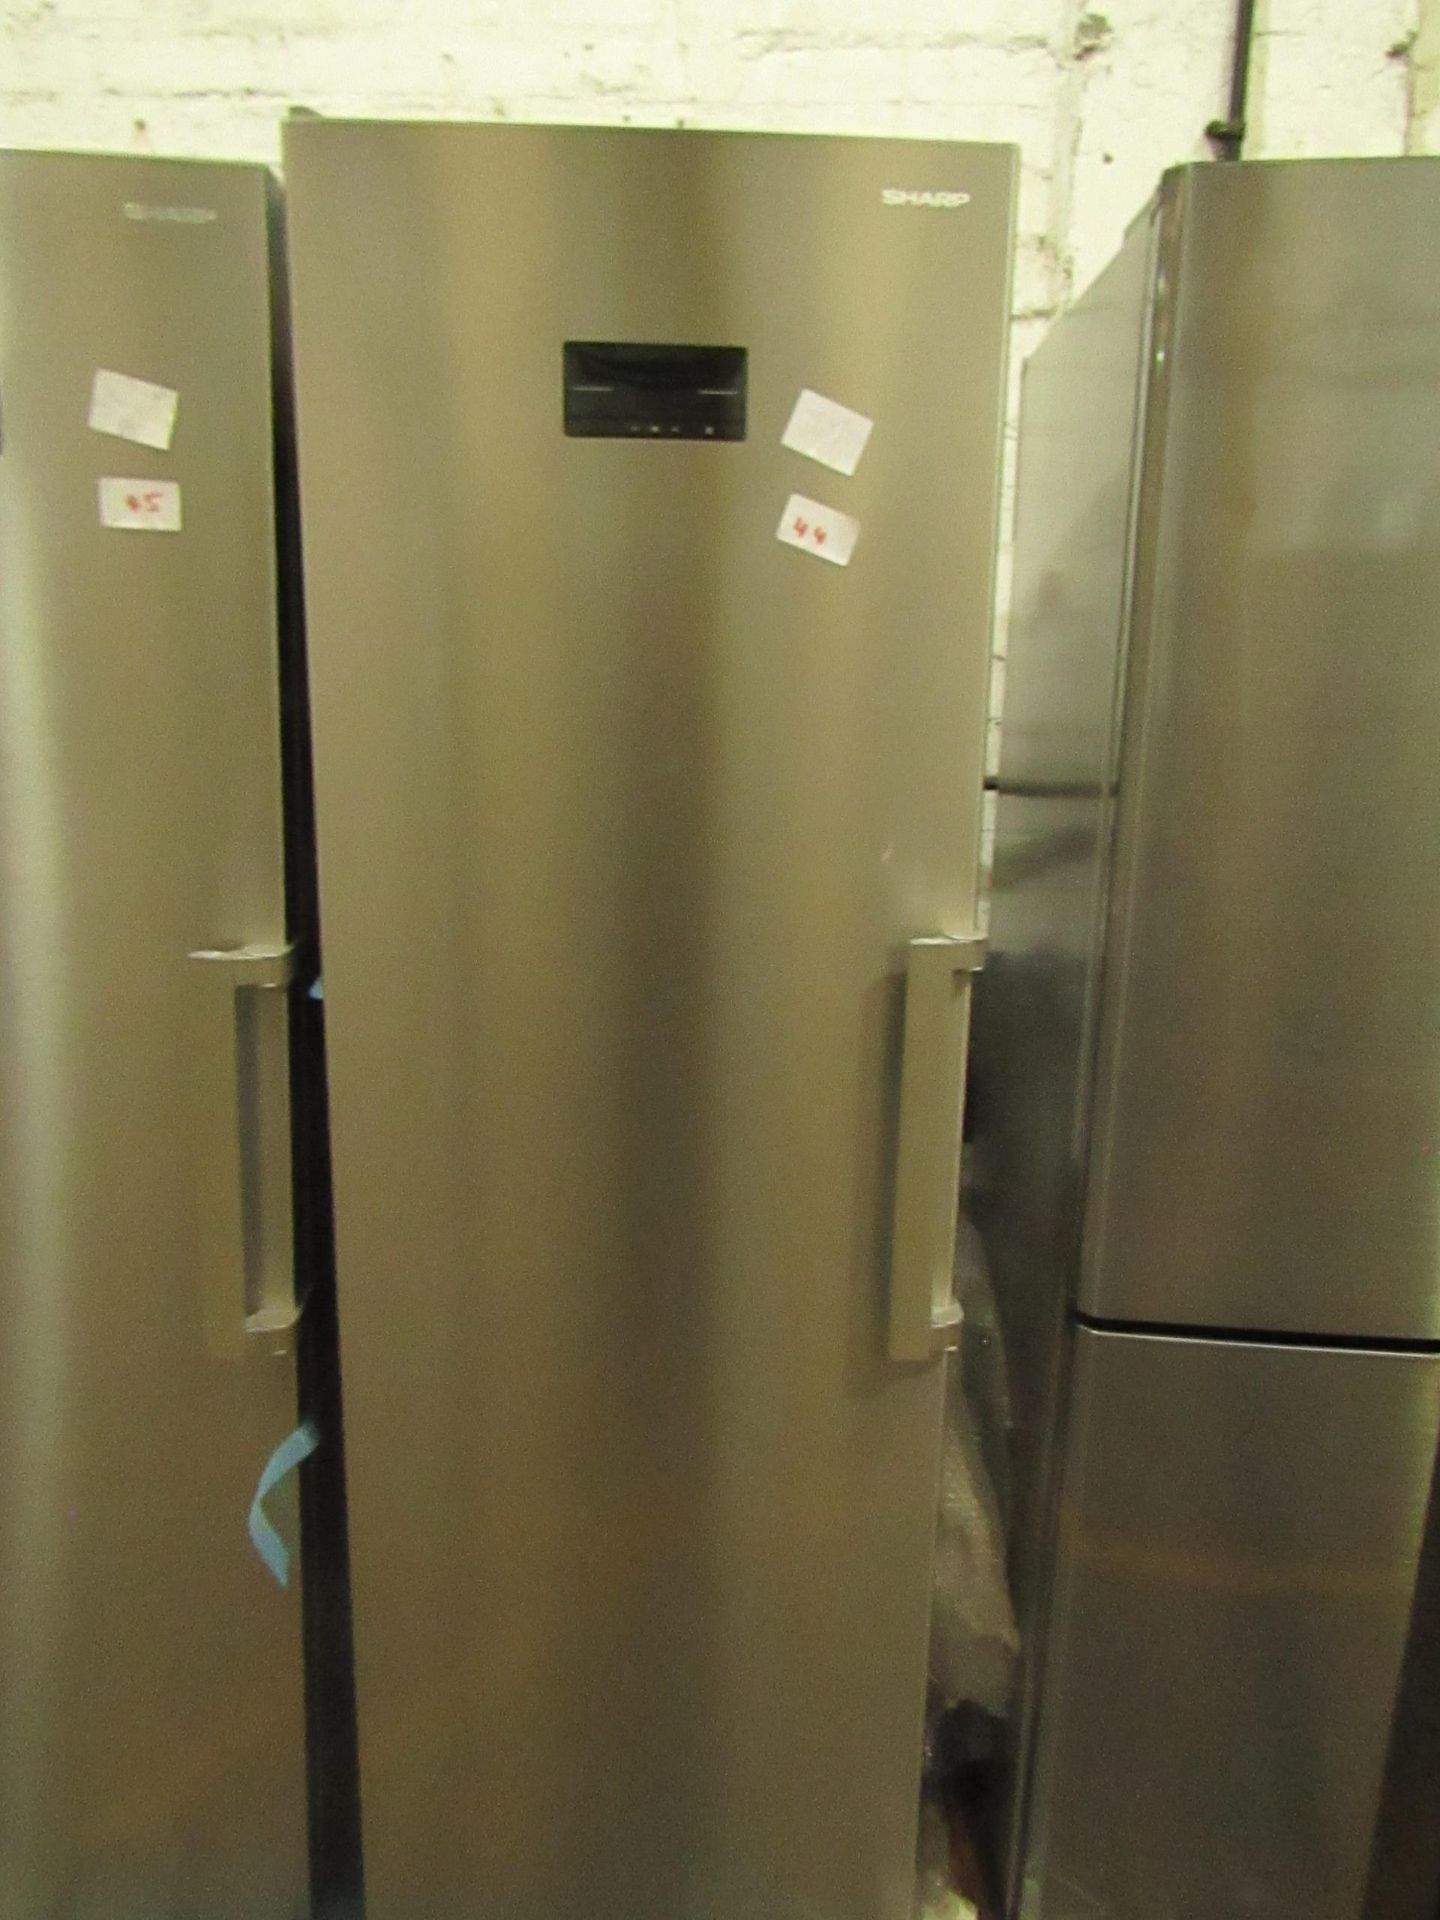 Sharp tall freestanding freezer, powers on but doesn't get cold